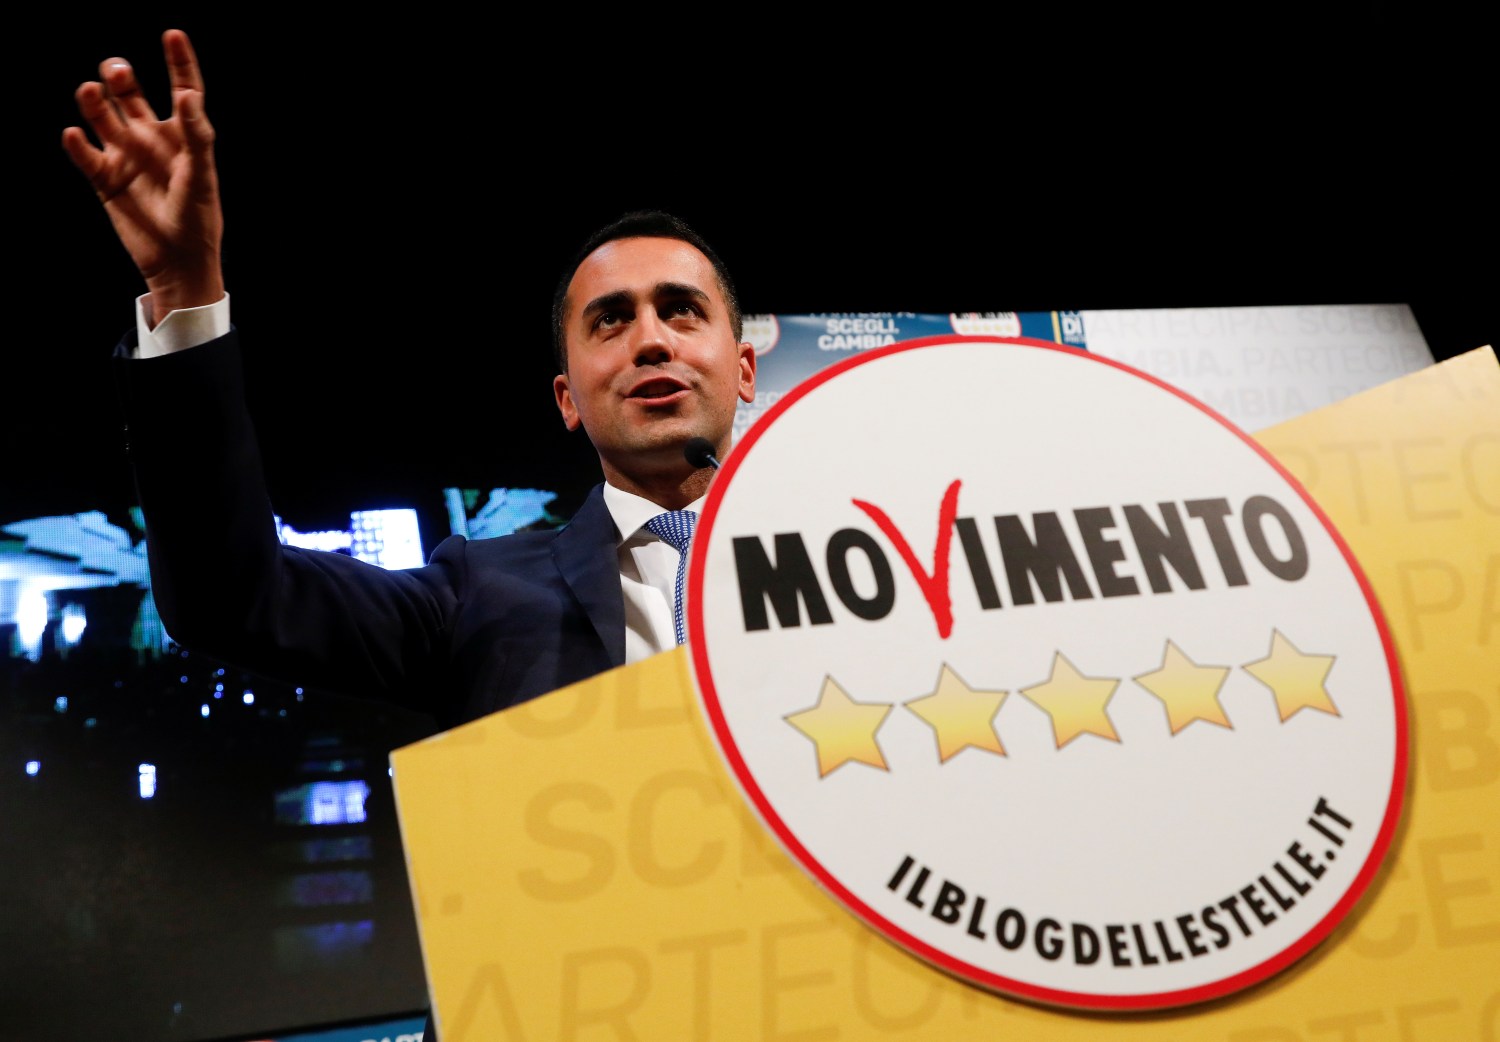 5-Star Movement leader Luigi Di Maio speaks during an electoral rally in Caserta, Italy February 23, 2018. REUTERS/Ciro De Luca - RC1551BD32F0